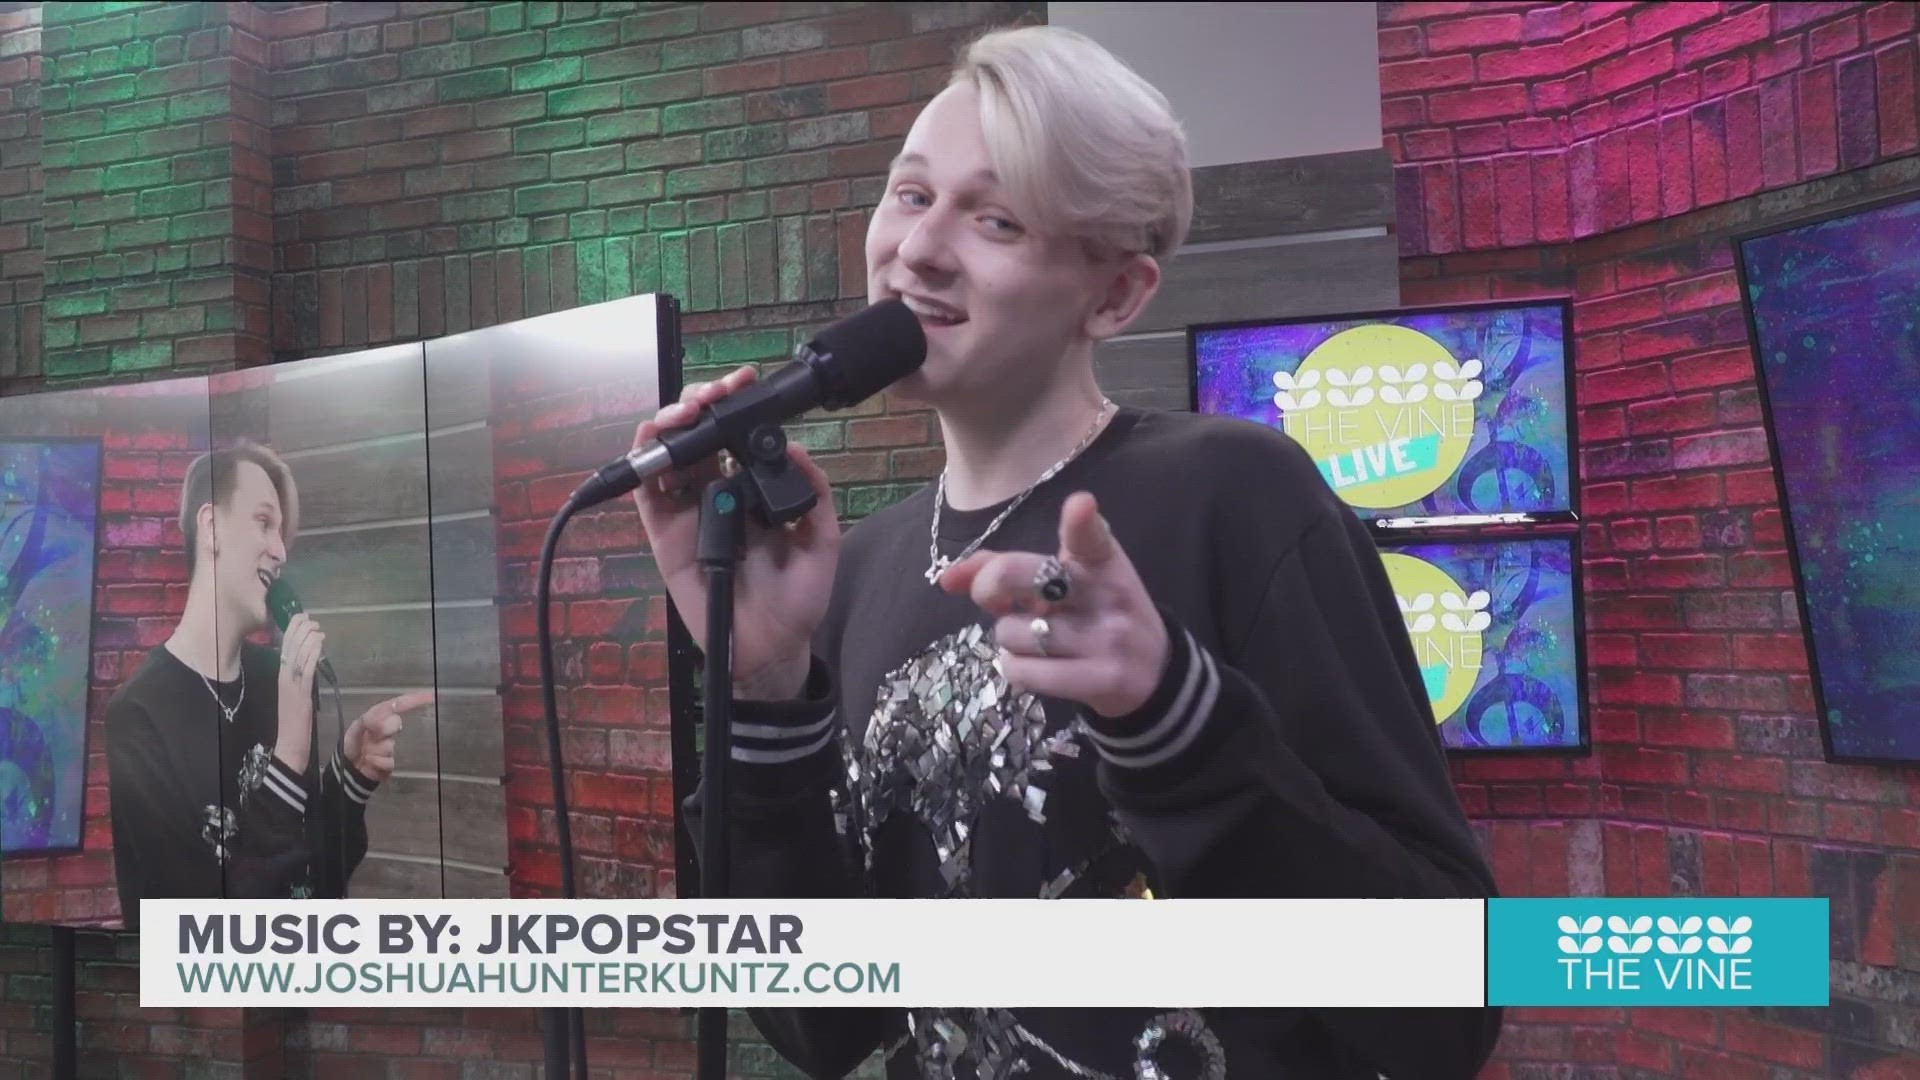 Local musician, JKPopstar, tells us about his musical journey and his next steps after high school.